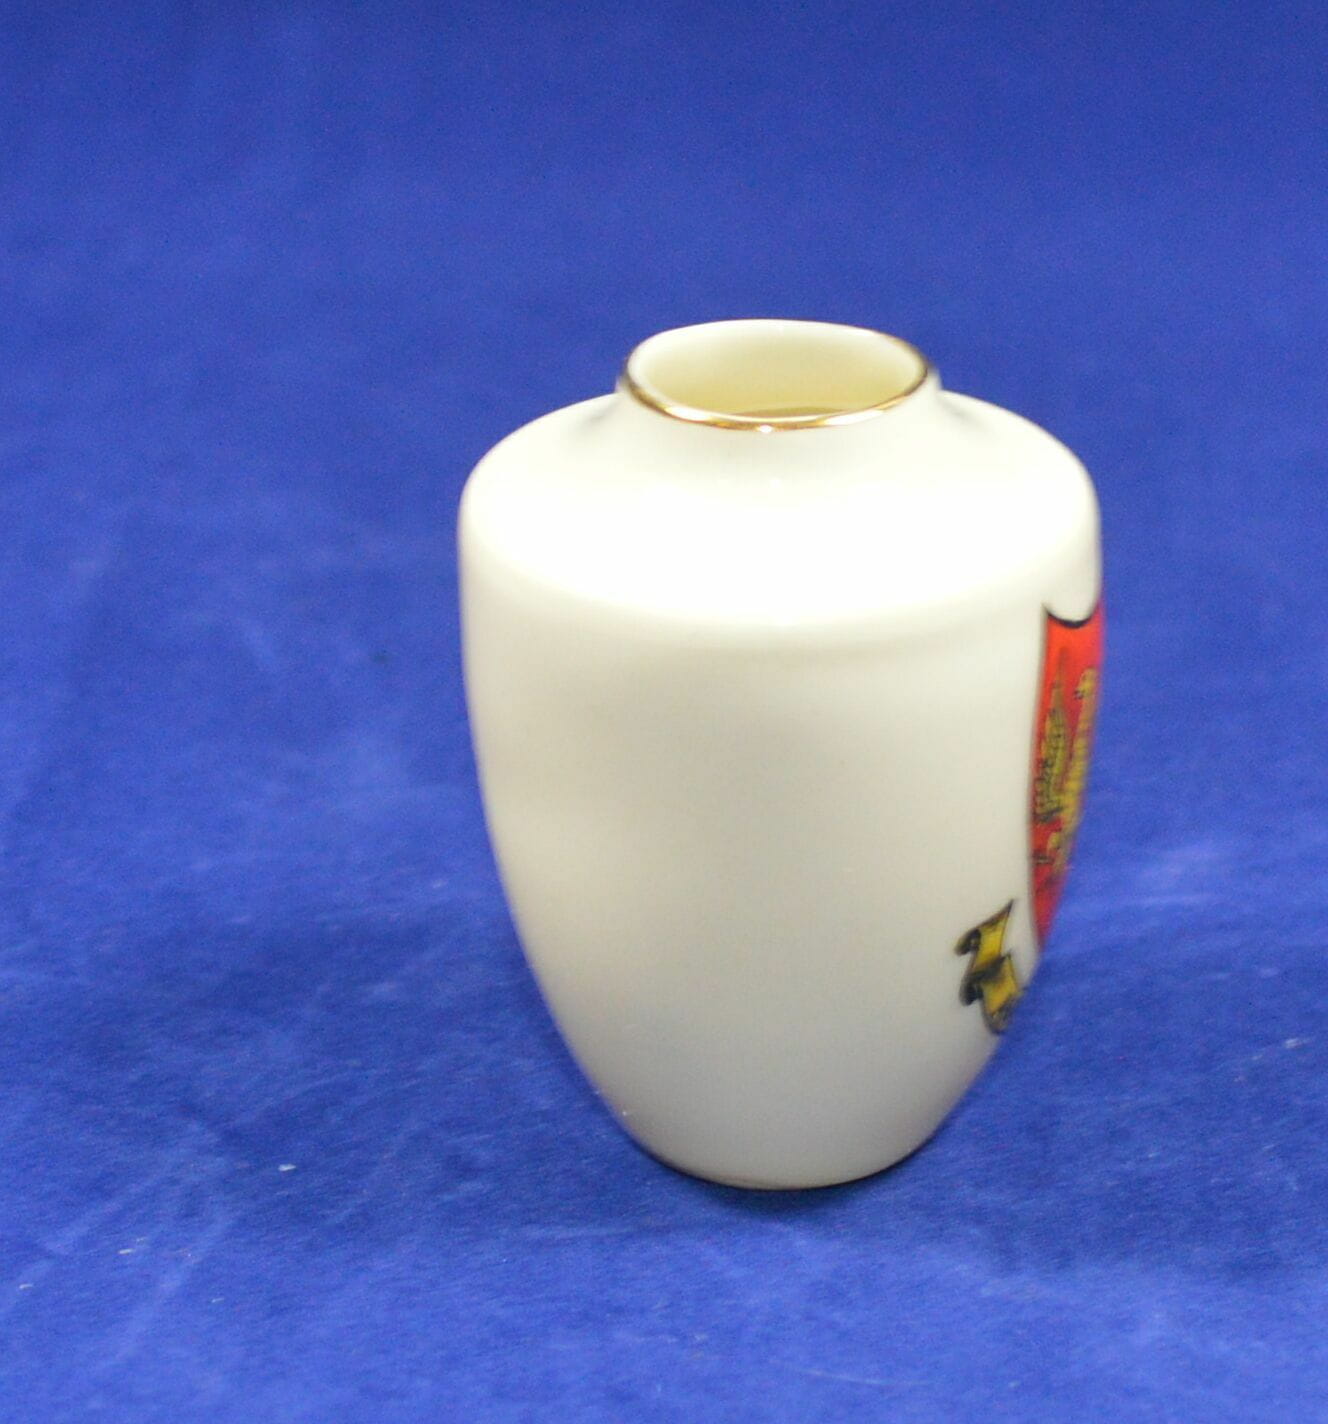 CARLTON CHINA CRESTED WARE CHINA VASE AMBLESIDE(PREVIOUSLY OWNED)GOOD CONDITION - TMD167207